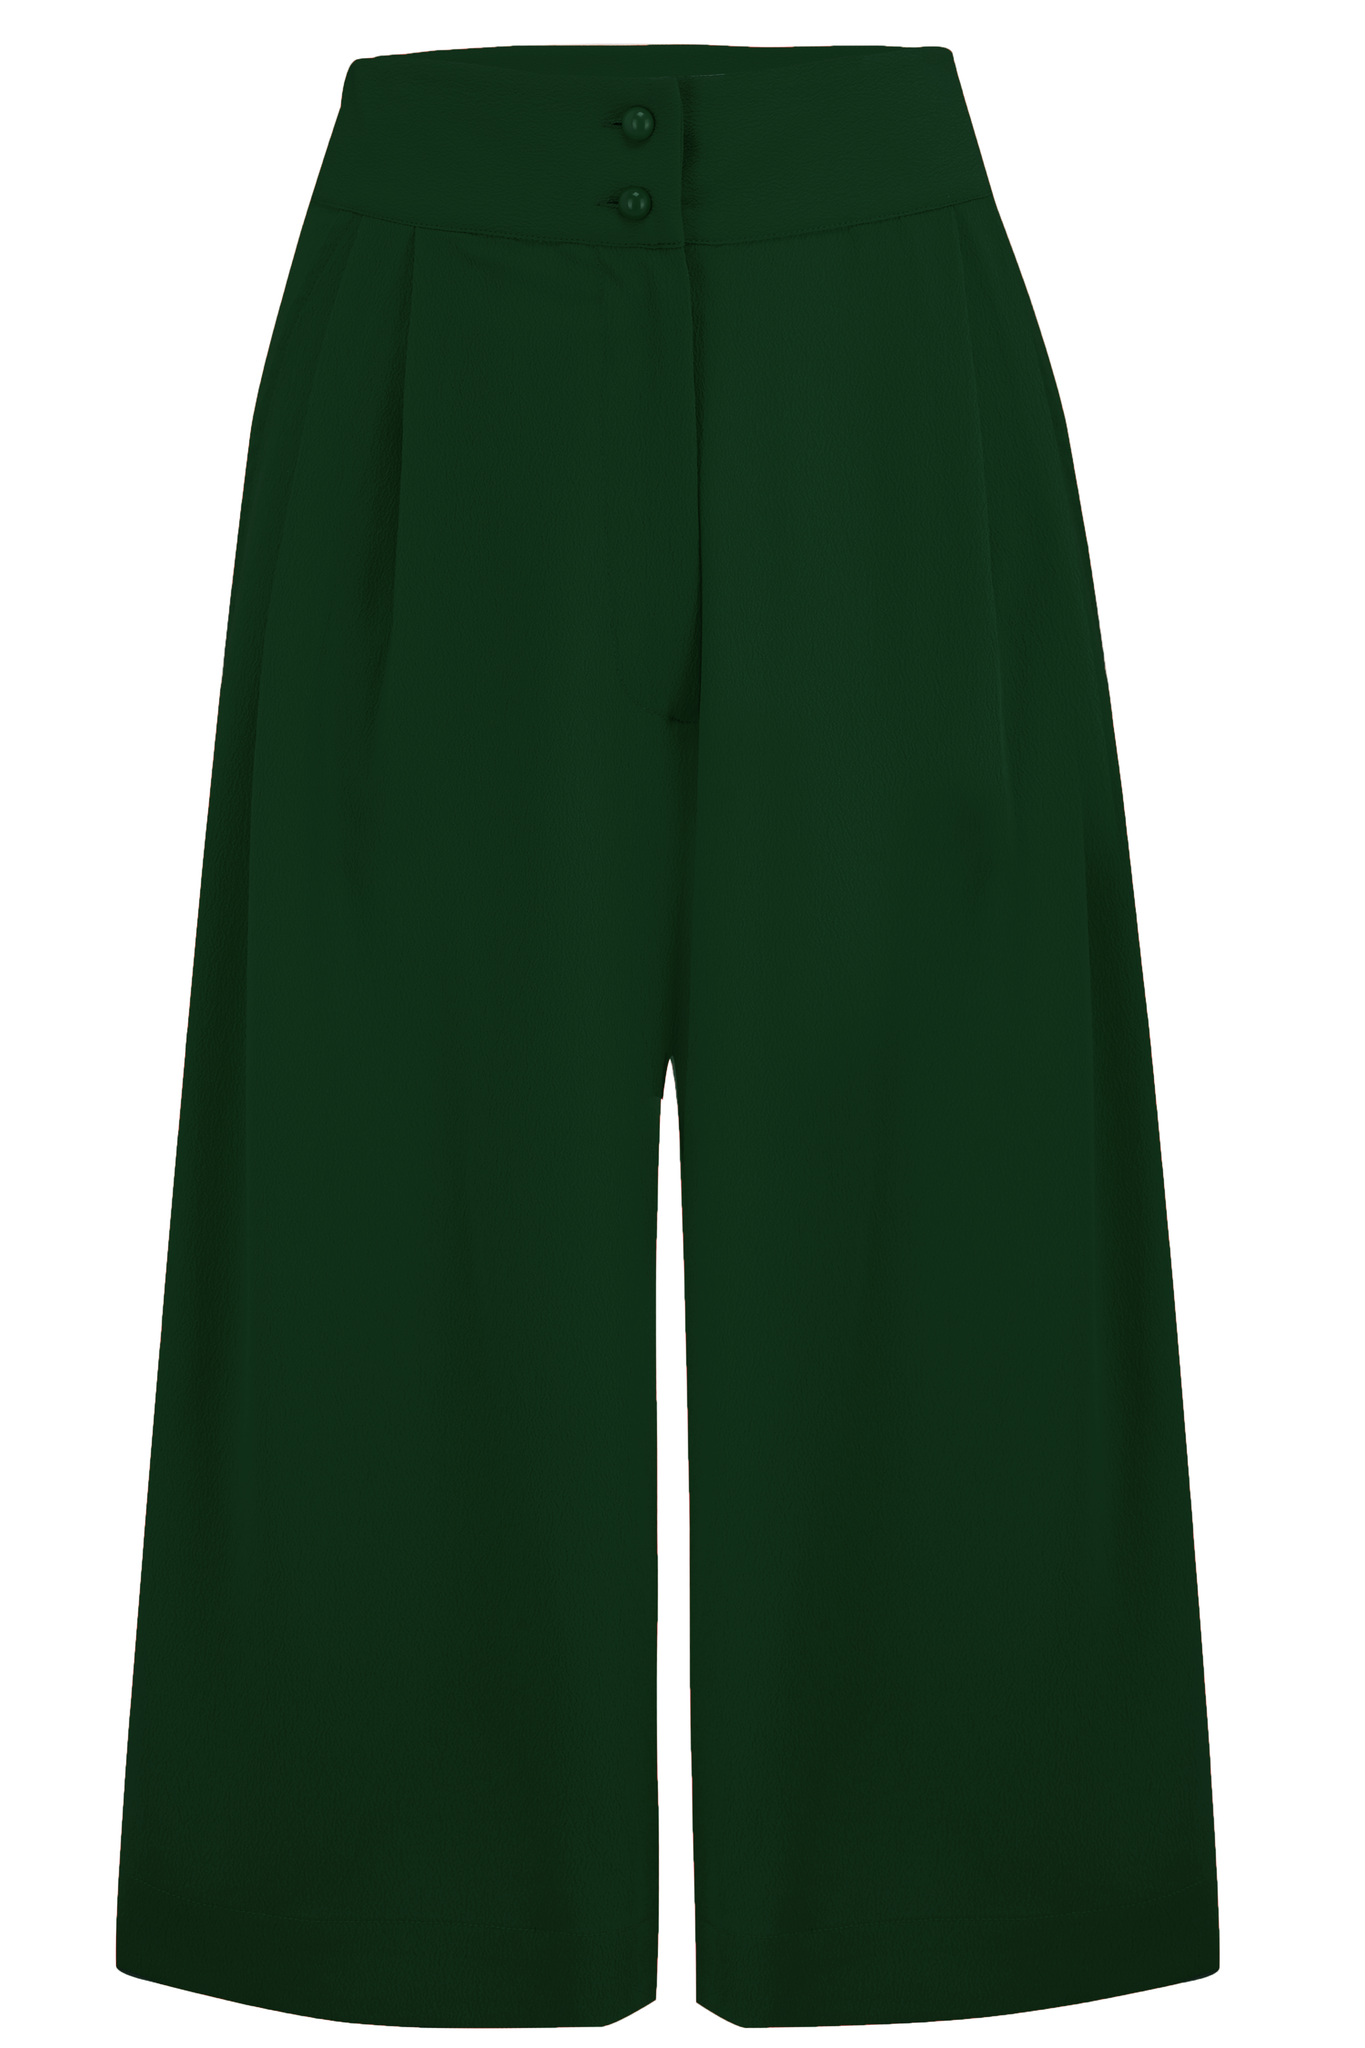 **Sample Sale** The "Sophia" Palazzo Culottes in Solid Green, Classic & Easy To Wear Vintage Inspired Style - True and authentic vintage style clothing, inspired by the Classic styles of CC41 , WW2 and the fun 1950s RocknRoll era, for everyday wear plus events like Goodwood Revival, Twinwood Festival and Viva Las Vegas Rockabilly Weekend Rock n Romance Rock n Romance